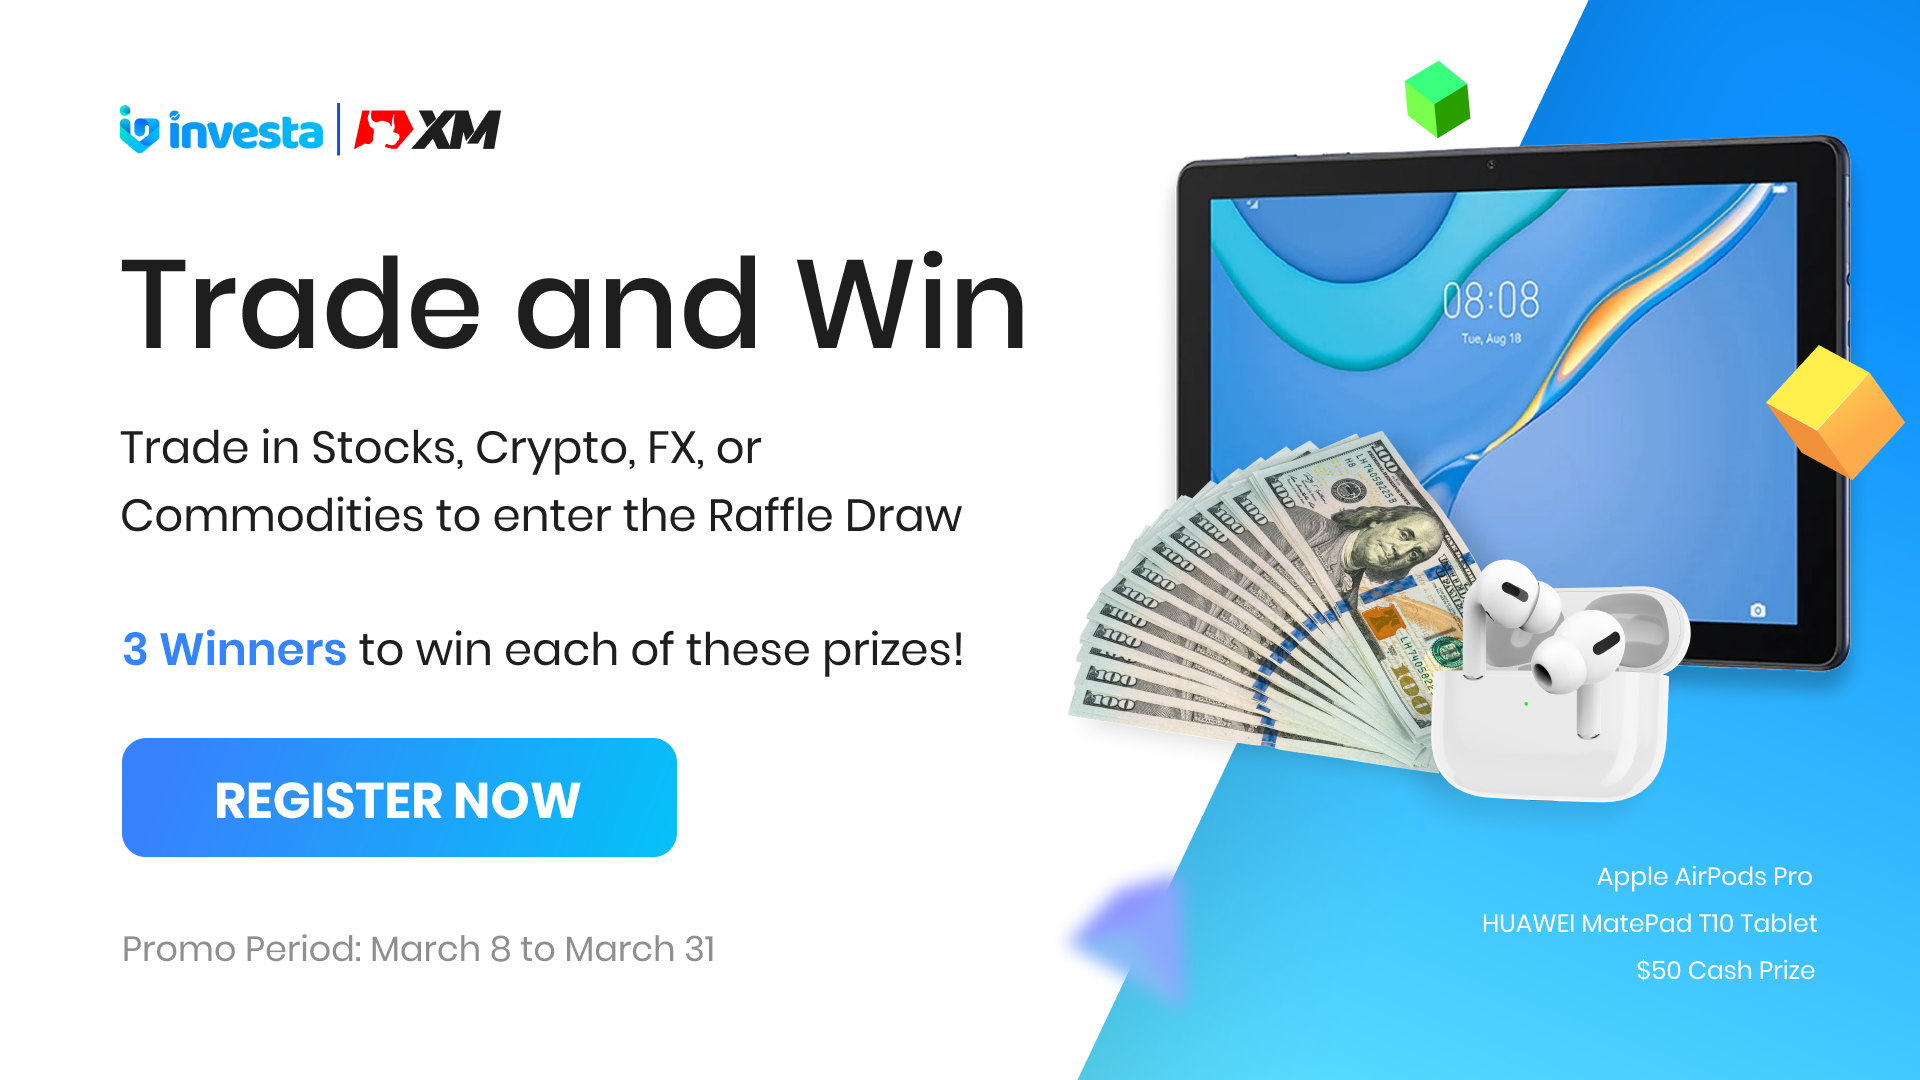 Trade and win big with XM